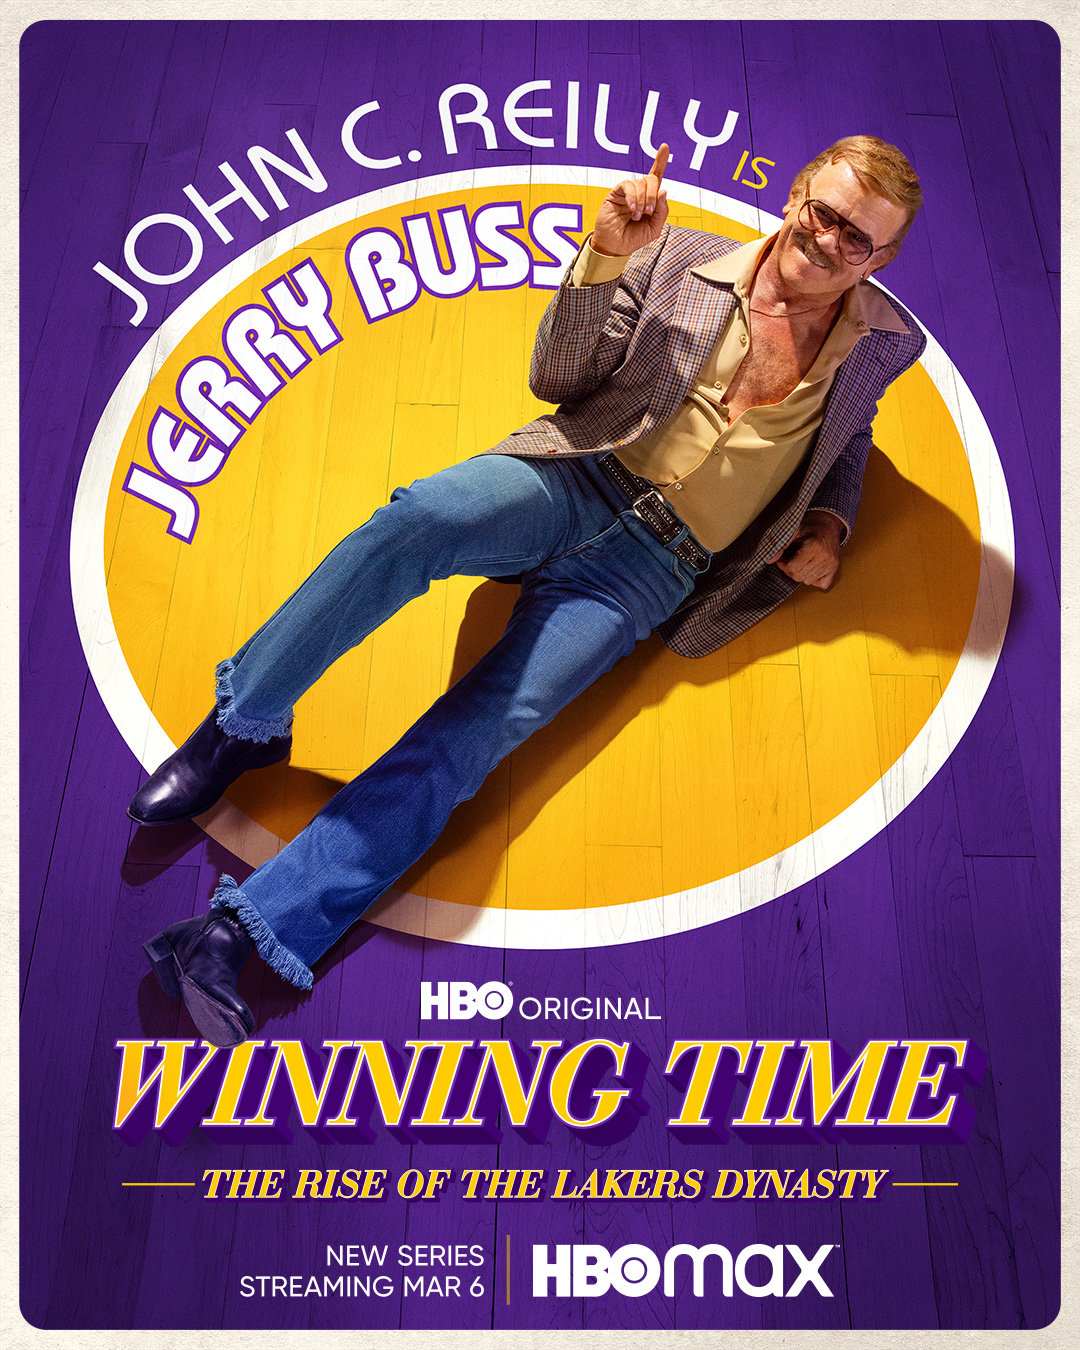 Winning Time Posters Set Premiere Date for HBO's Lakers Series